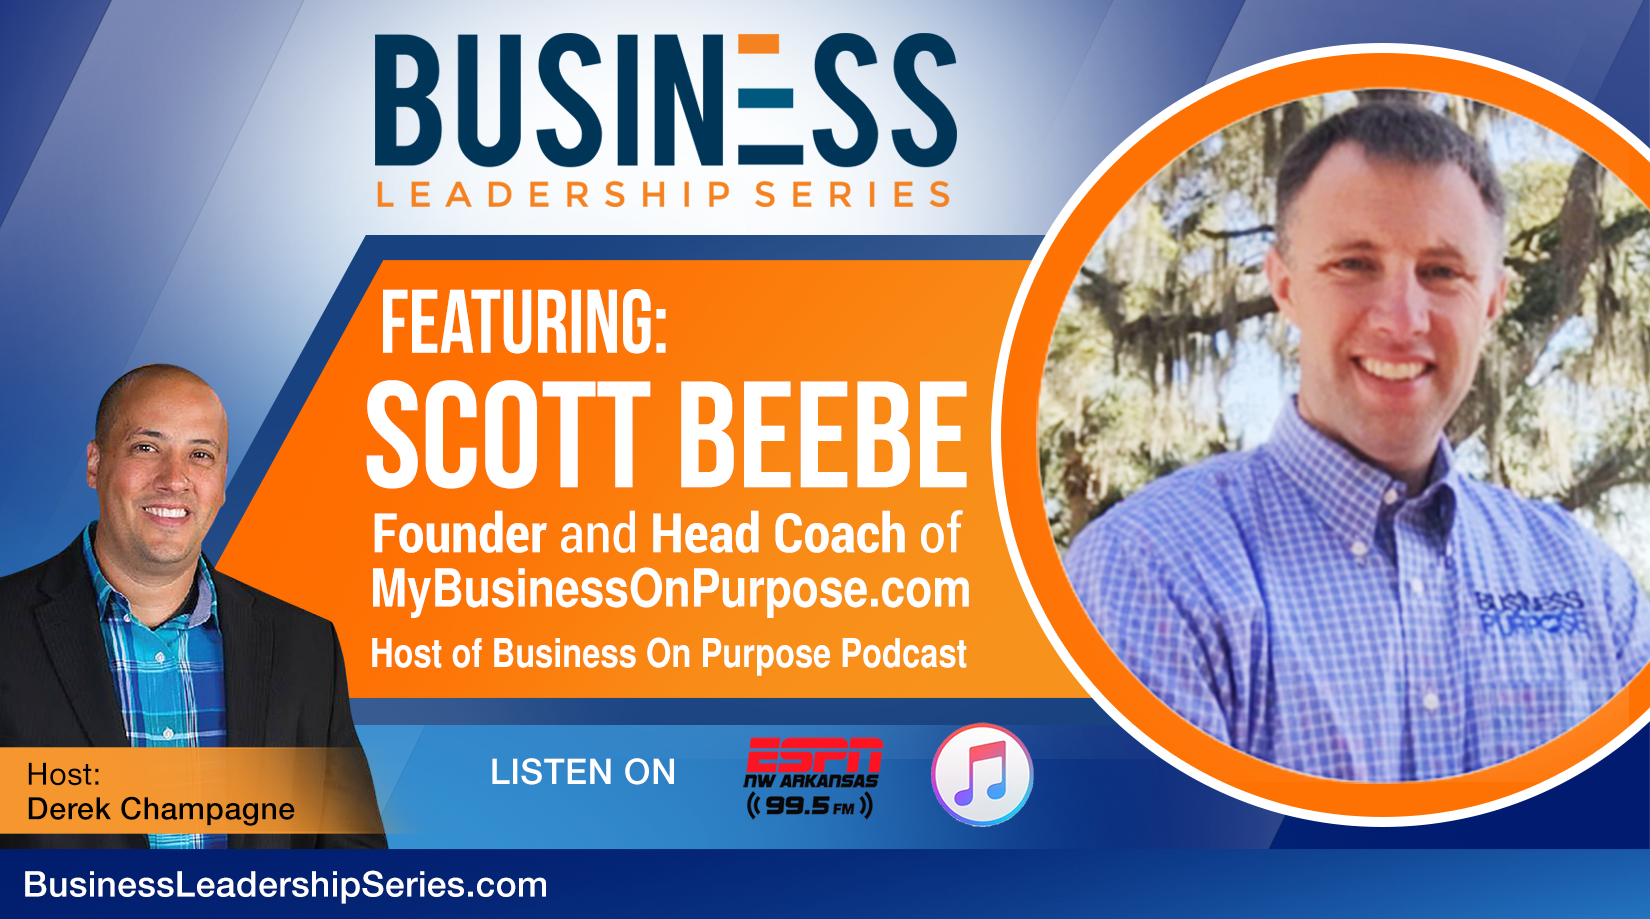 Interview with Scott Beebe, Founder & Head Coach of MyBusinessonPurpose.com